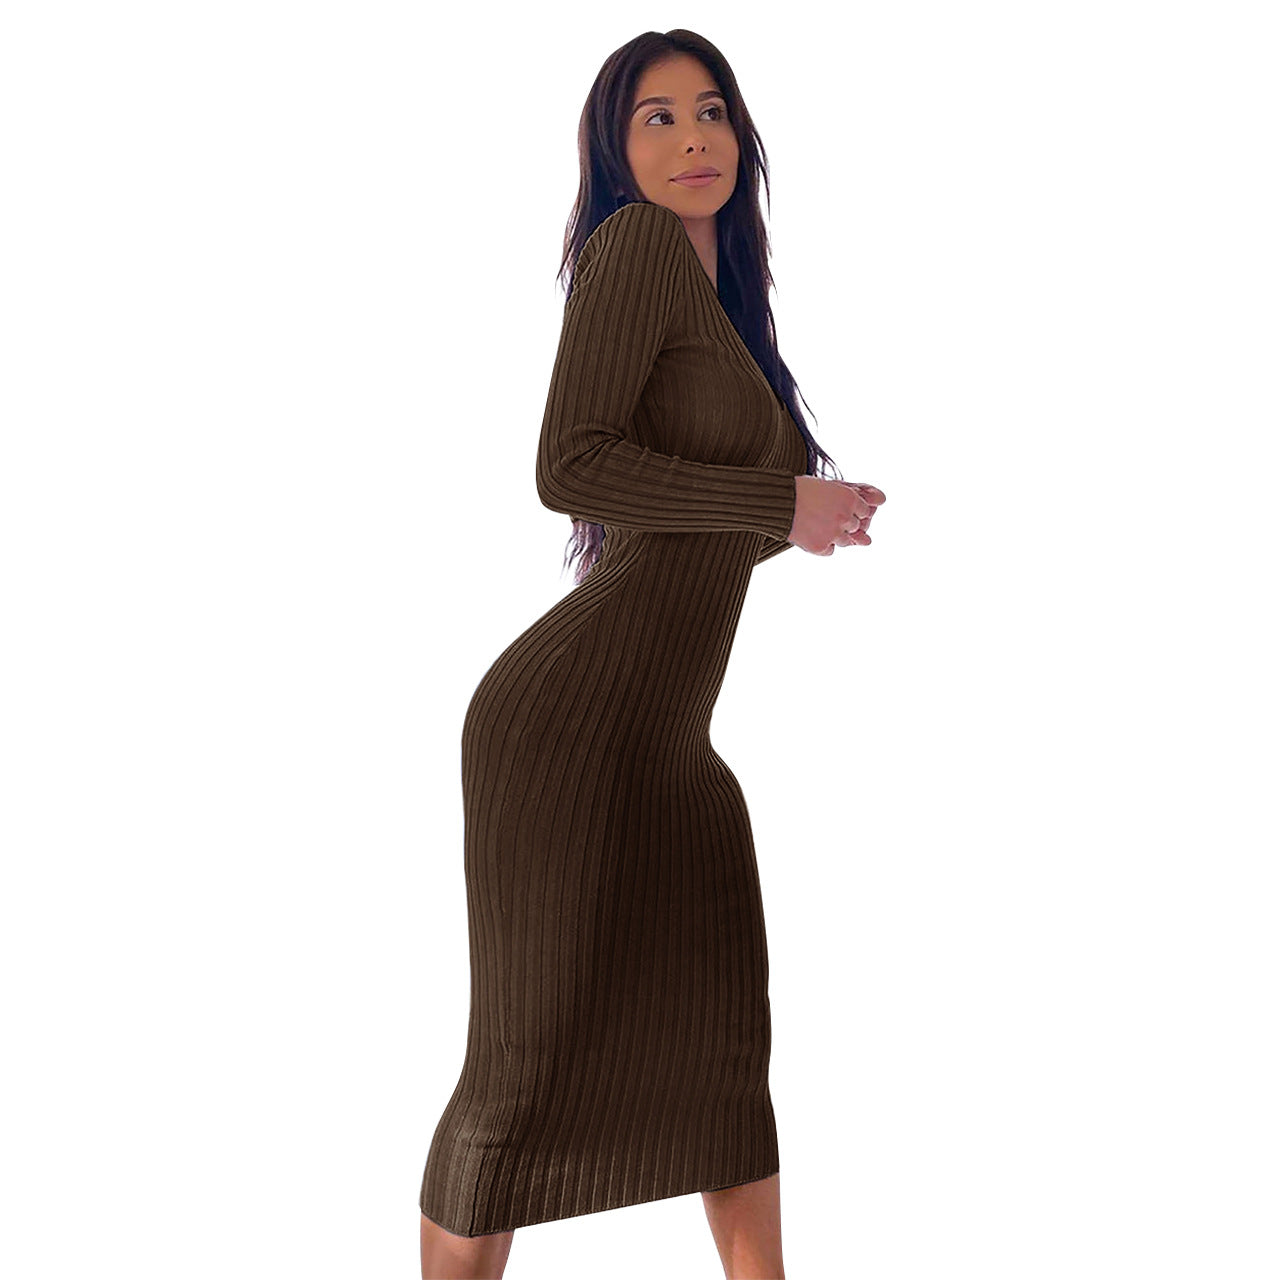 Troy Off The Shoulder Knit Midi Dress - Chocolate